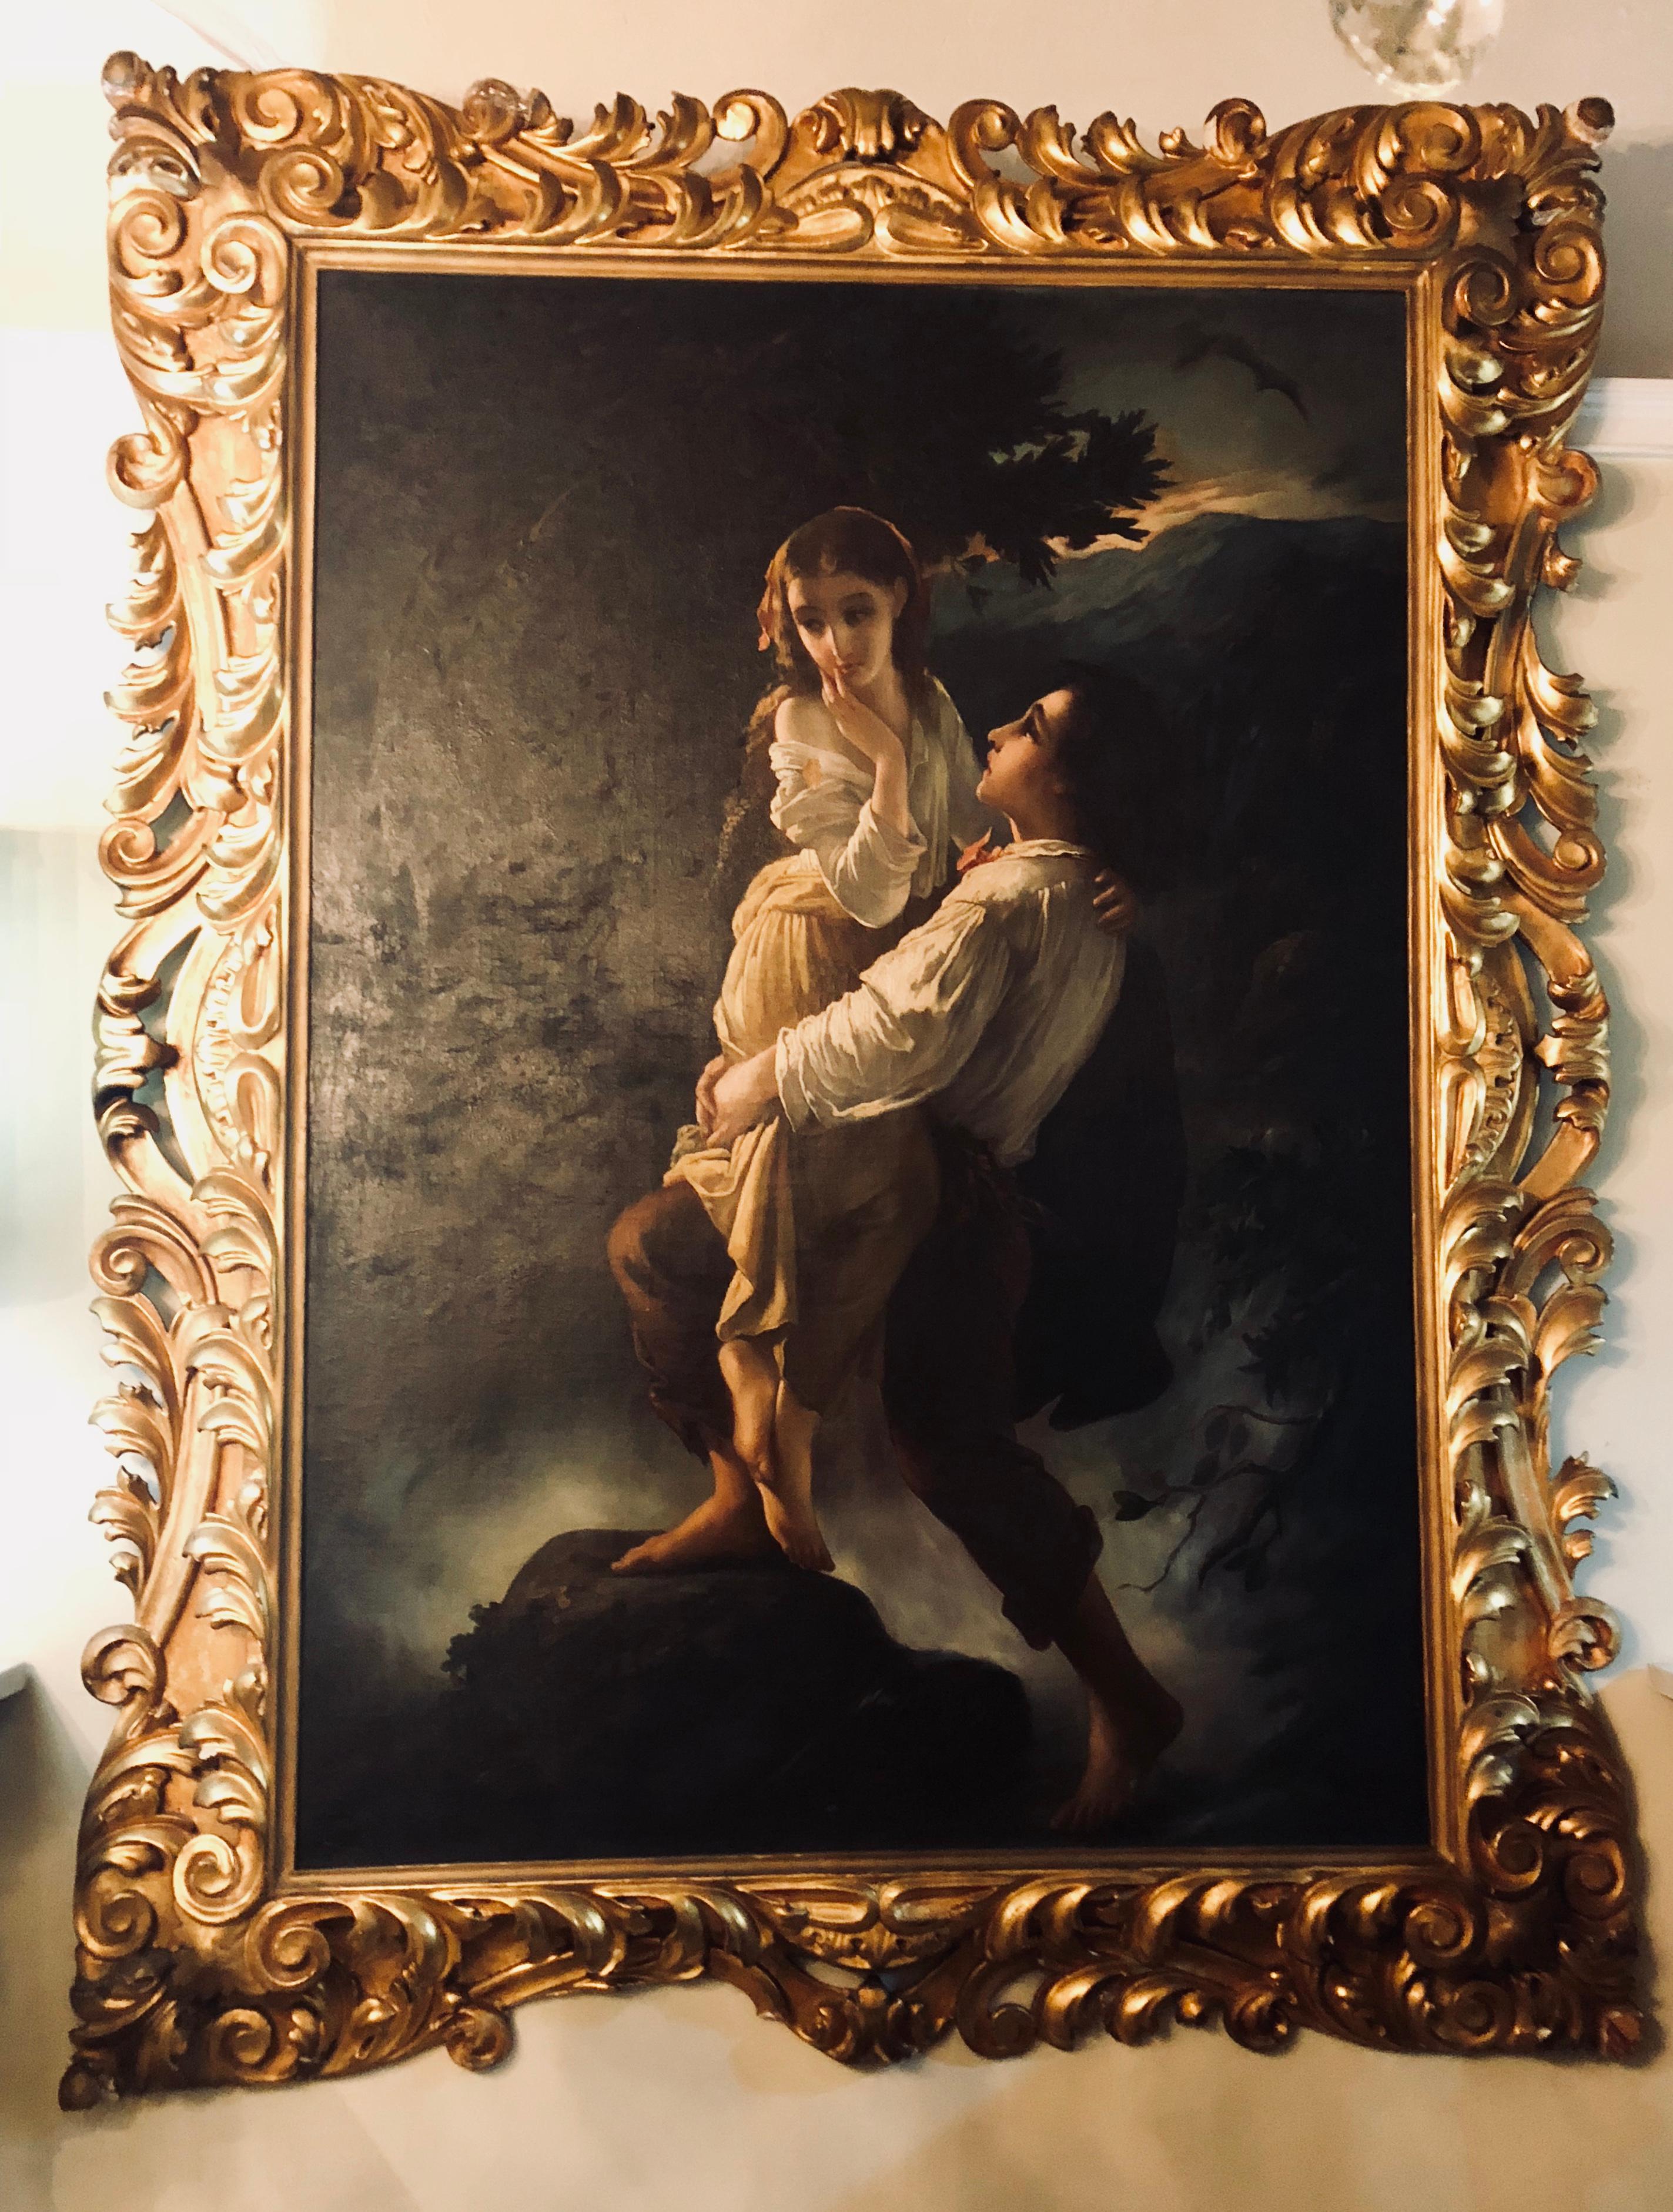 A monumental oil on canvas in The manner of the Old Masters showing a maiden to be deflowered. This palatial oil on canvas from the late 19th or early 20th century is simply stunning and bears the most wonderful quality one could possibly hope for.